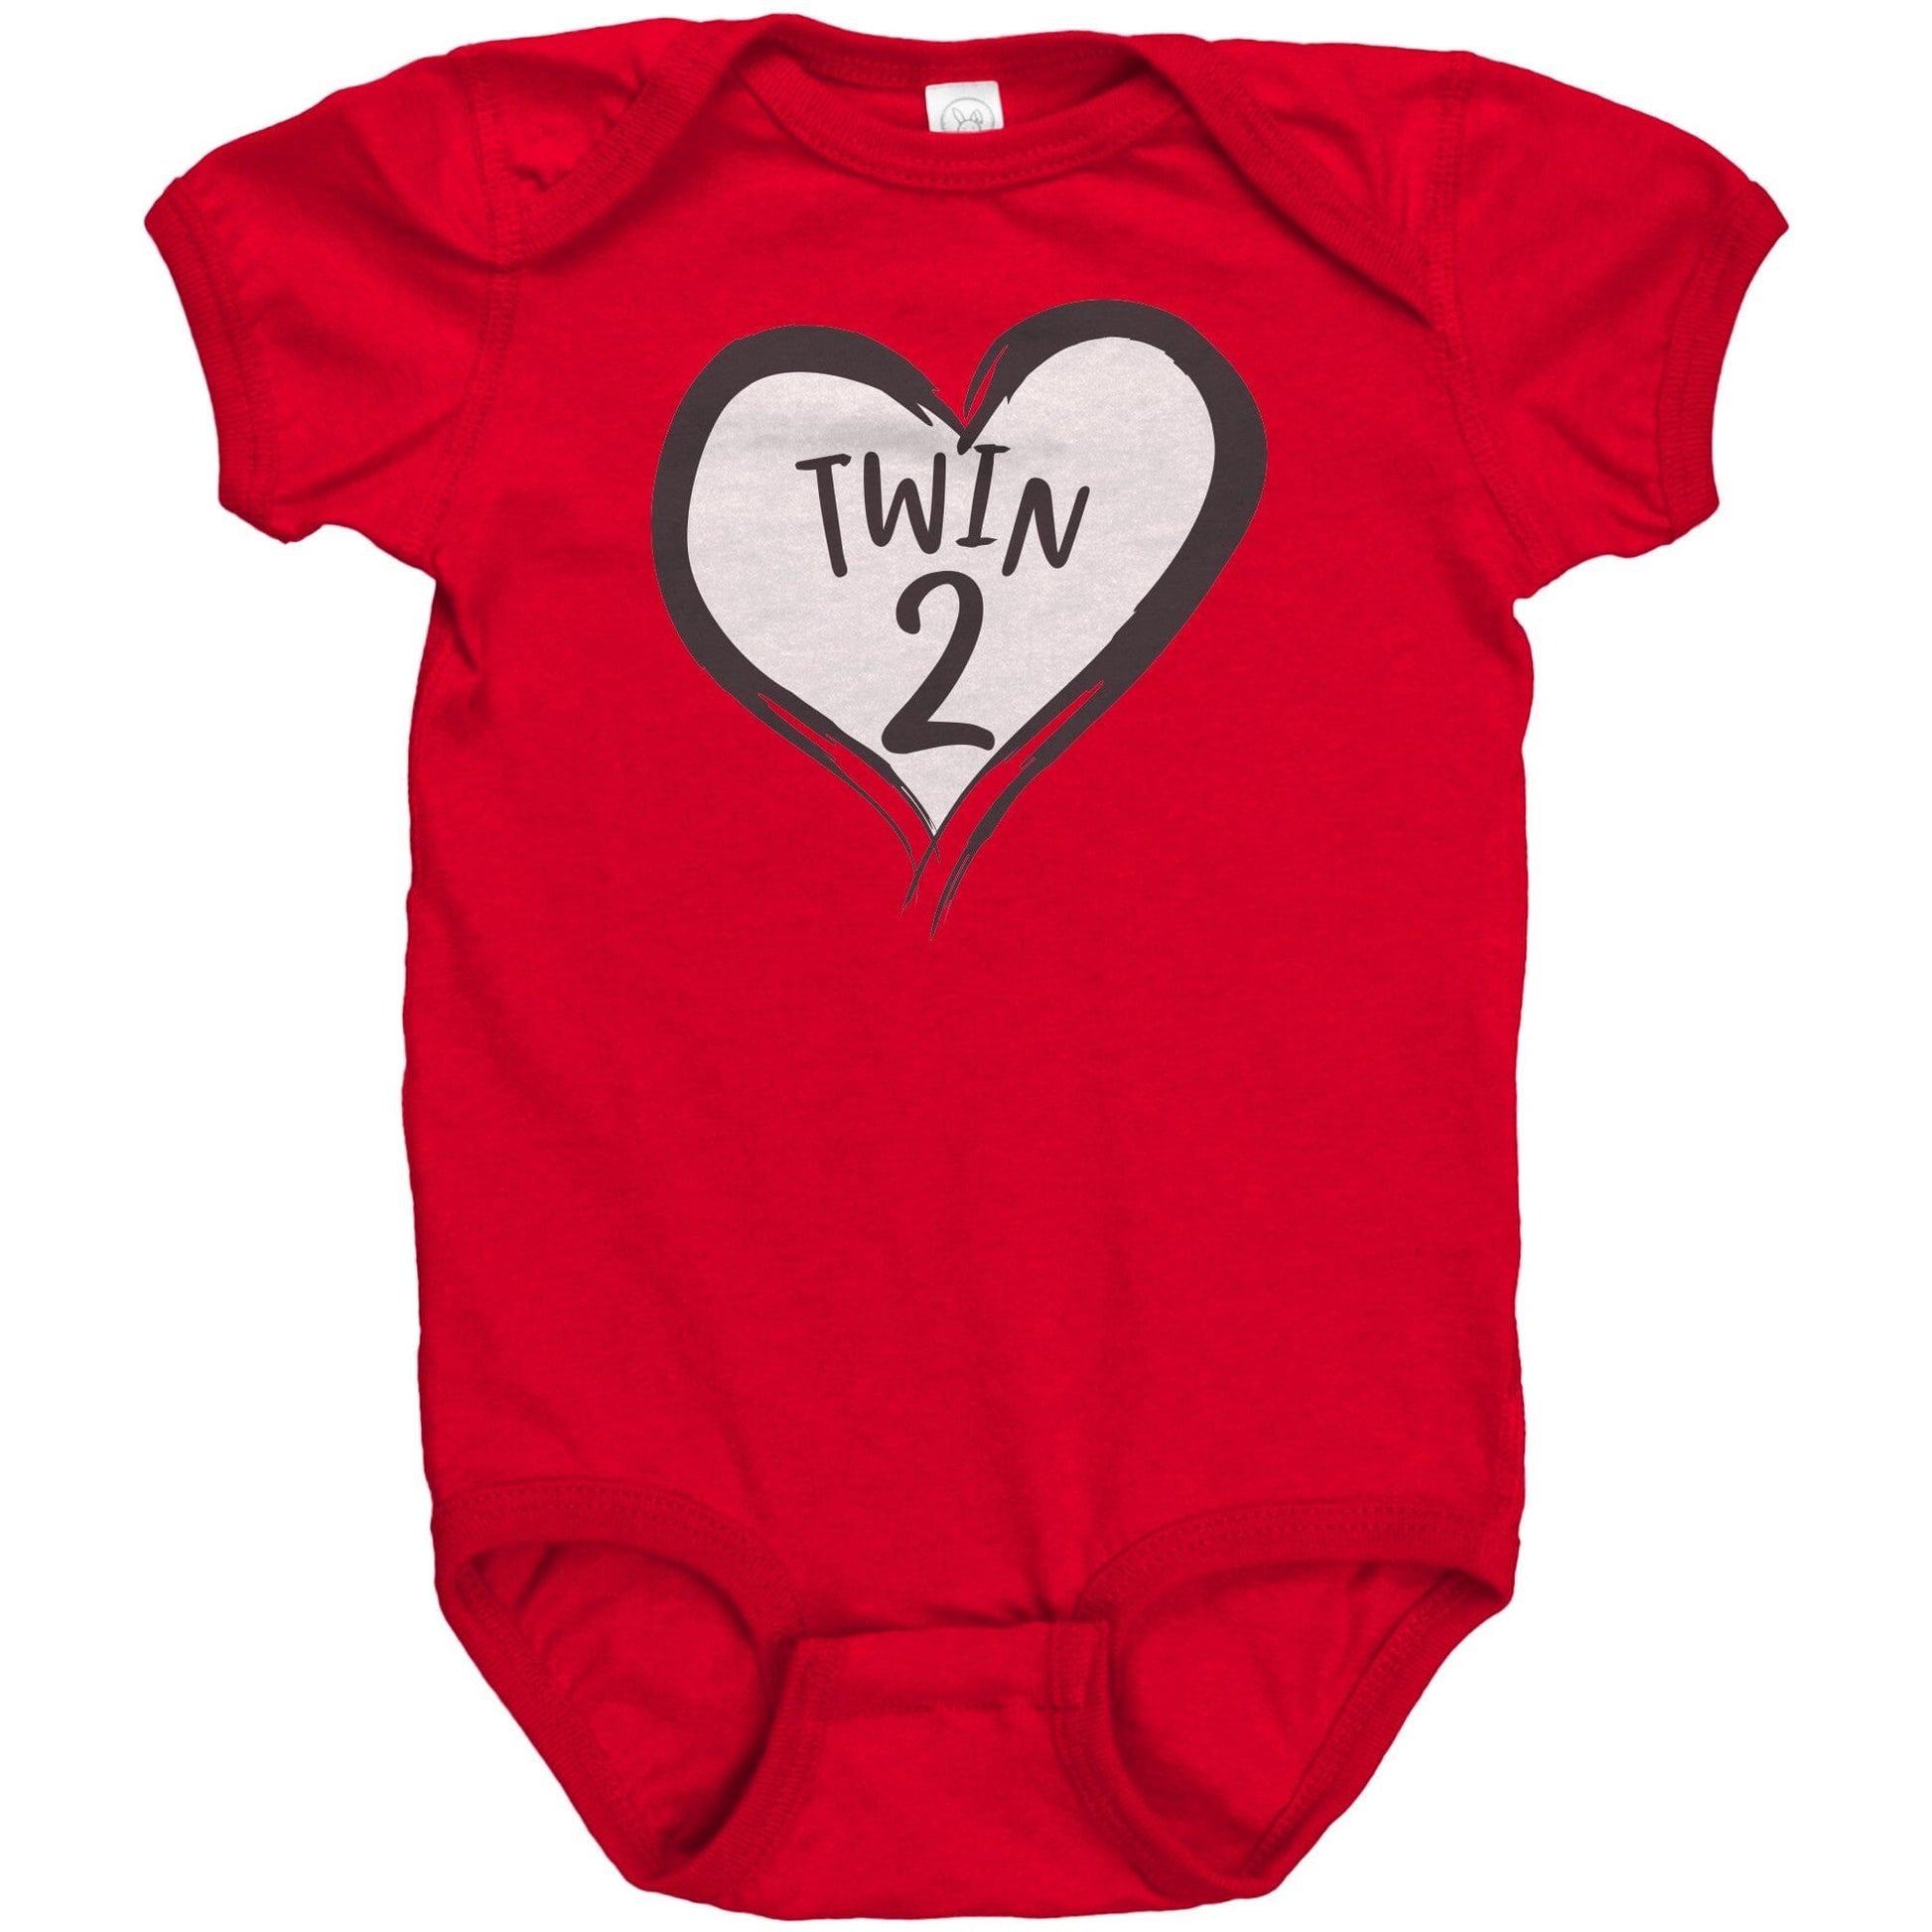 Twin 2 Valentine's Day Onesie Apparel teelaunch Red NB 